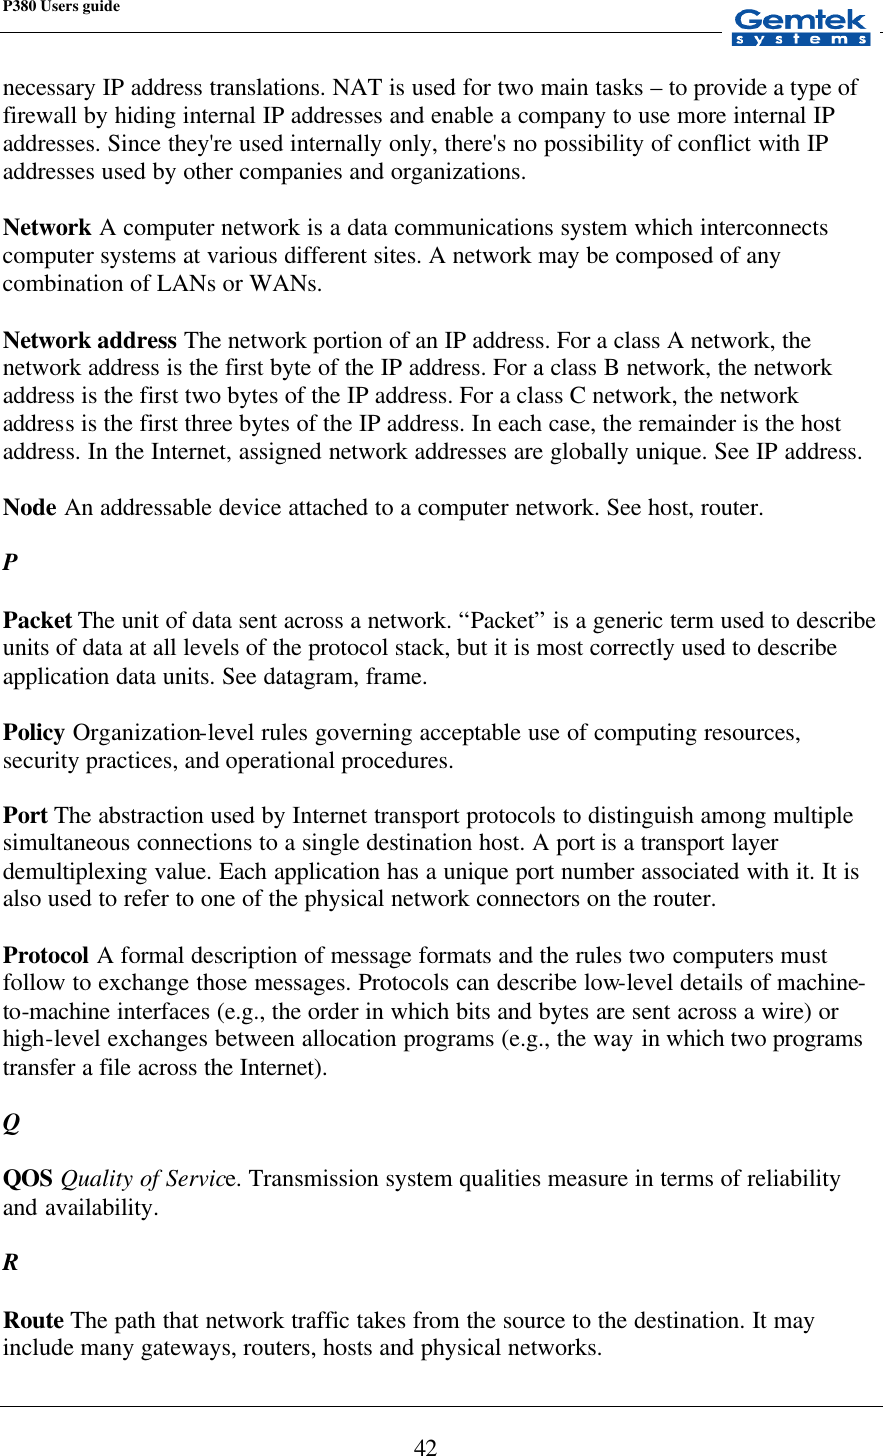 P380 Users guide            42 necessary IP address translations. NAT is used for two main tasks – to provide a type of firewall by hiding internal IP addresses and enable a company to use more internal IP addresses. Since they&apos;re used internally only, there&apos;s no possibility of conflict with IP addresses used by other companies and organizations.  Network A computer network is a data communications system which interconnects computer systems at various different sites. A network may be composed of any combination of LANs or WANs.  Network address The network portion of an IP address. For a class A network, the network address is the first byte of the IP address. For a class B network, the network address is the first two bytes of the IP address. For a class C network, the network address is the first three bytes of the IP address. In each case, the remainder is the host address. In the Internet, assigned network addresses are globally unique. See IP address.  Node An addressable device attached to a computer network. See host, router.  P  Packet The unit of data sent across a network. “Packet” is a generic term used to describe units of data at all levels of the protocol stack, but it is most correctly used to describe application data units. See datagram, frame.  Policy Organization-level rules governing acceptable use of computing resources, security practices, and operational procedures.   Port The abstraction used by Internet transport protocols to distinguish among multiple simultaneous connections to a single destination host. A port is a transport layer demultiplexing value. Each application has a unique port number associated with it. It is also used to refer to one of the physical network connectors on the router.  Protocol A formal description of message formats and the rules two computers must follow to exchange those messages. Protocols can describe low-level details of machine-to-machine interfaces (e.g., the order in which bits and bytes are sent across a wire) or high-level exchanges between allocation programs (e.g., the way in which two programs transfer a file across the Internet).  Q  QOS Quality of Service. Transmission system qualities measure in terms of reliability and availability.  R  Route The path that network traffic takes from the source to the destination. It may include many gateways, routers, hosts and physical networks. 